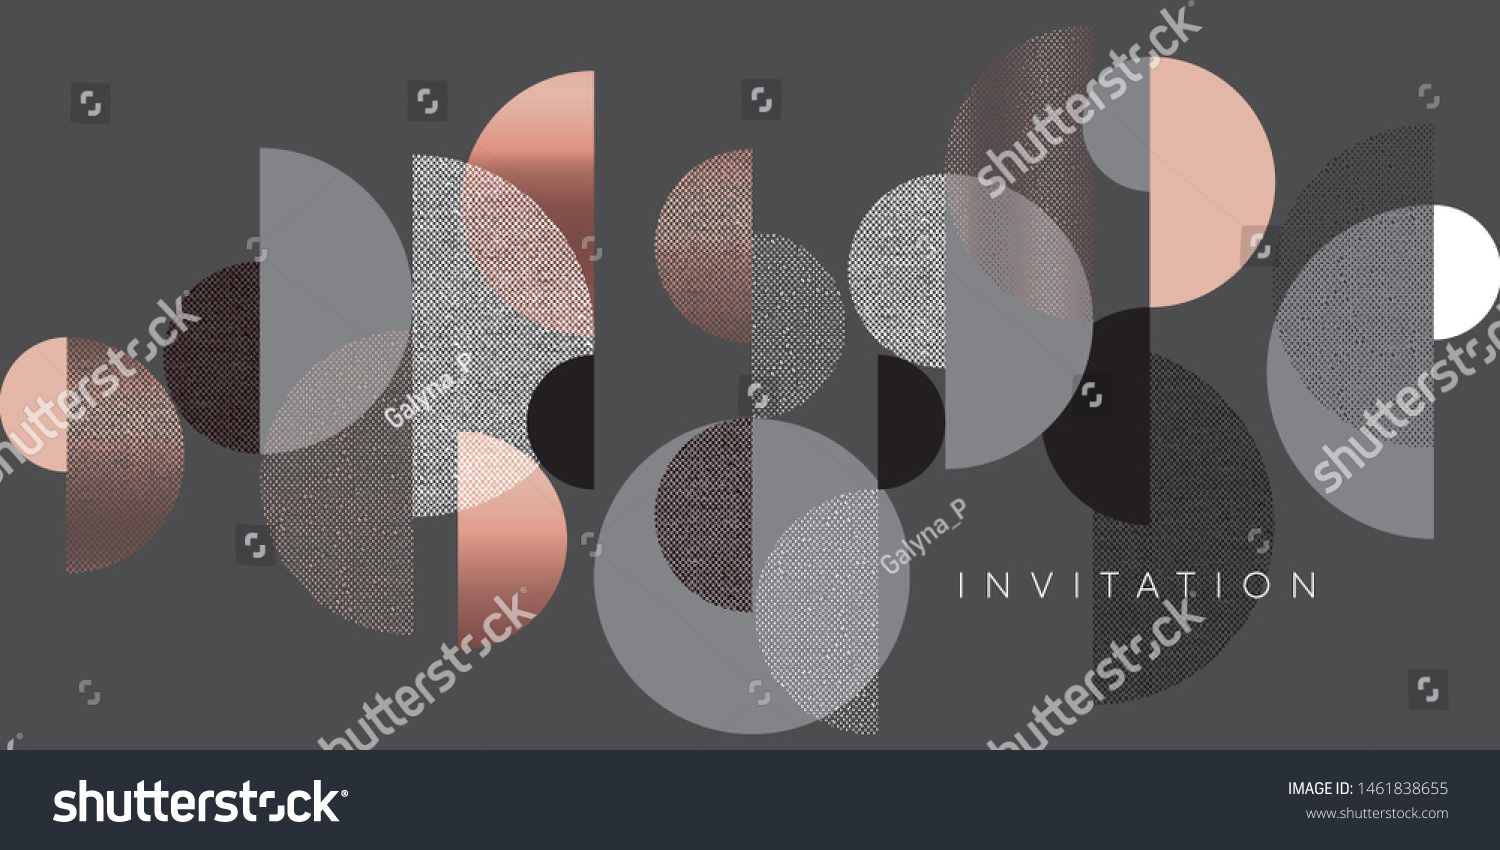 SVG of Horizontal elegant gradient geometric header template. Lux and business vibes laconic vector design element for card, header, invitation, poster, social media, post publication.
 svg